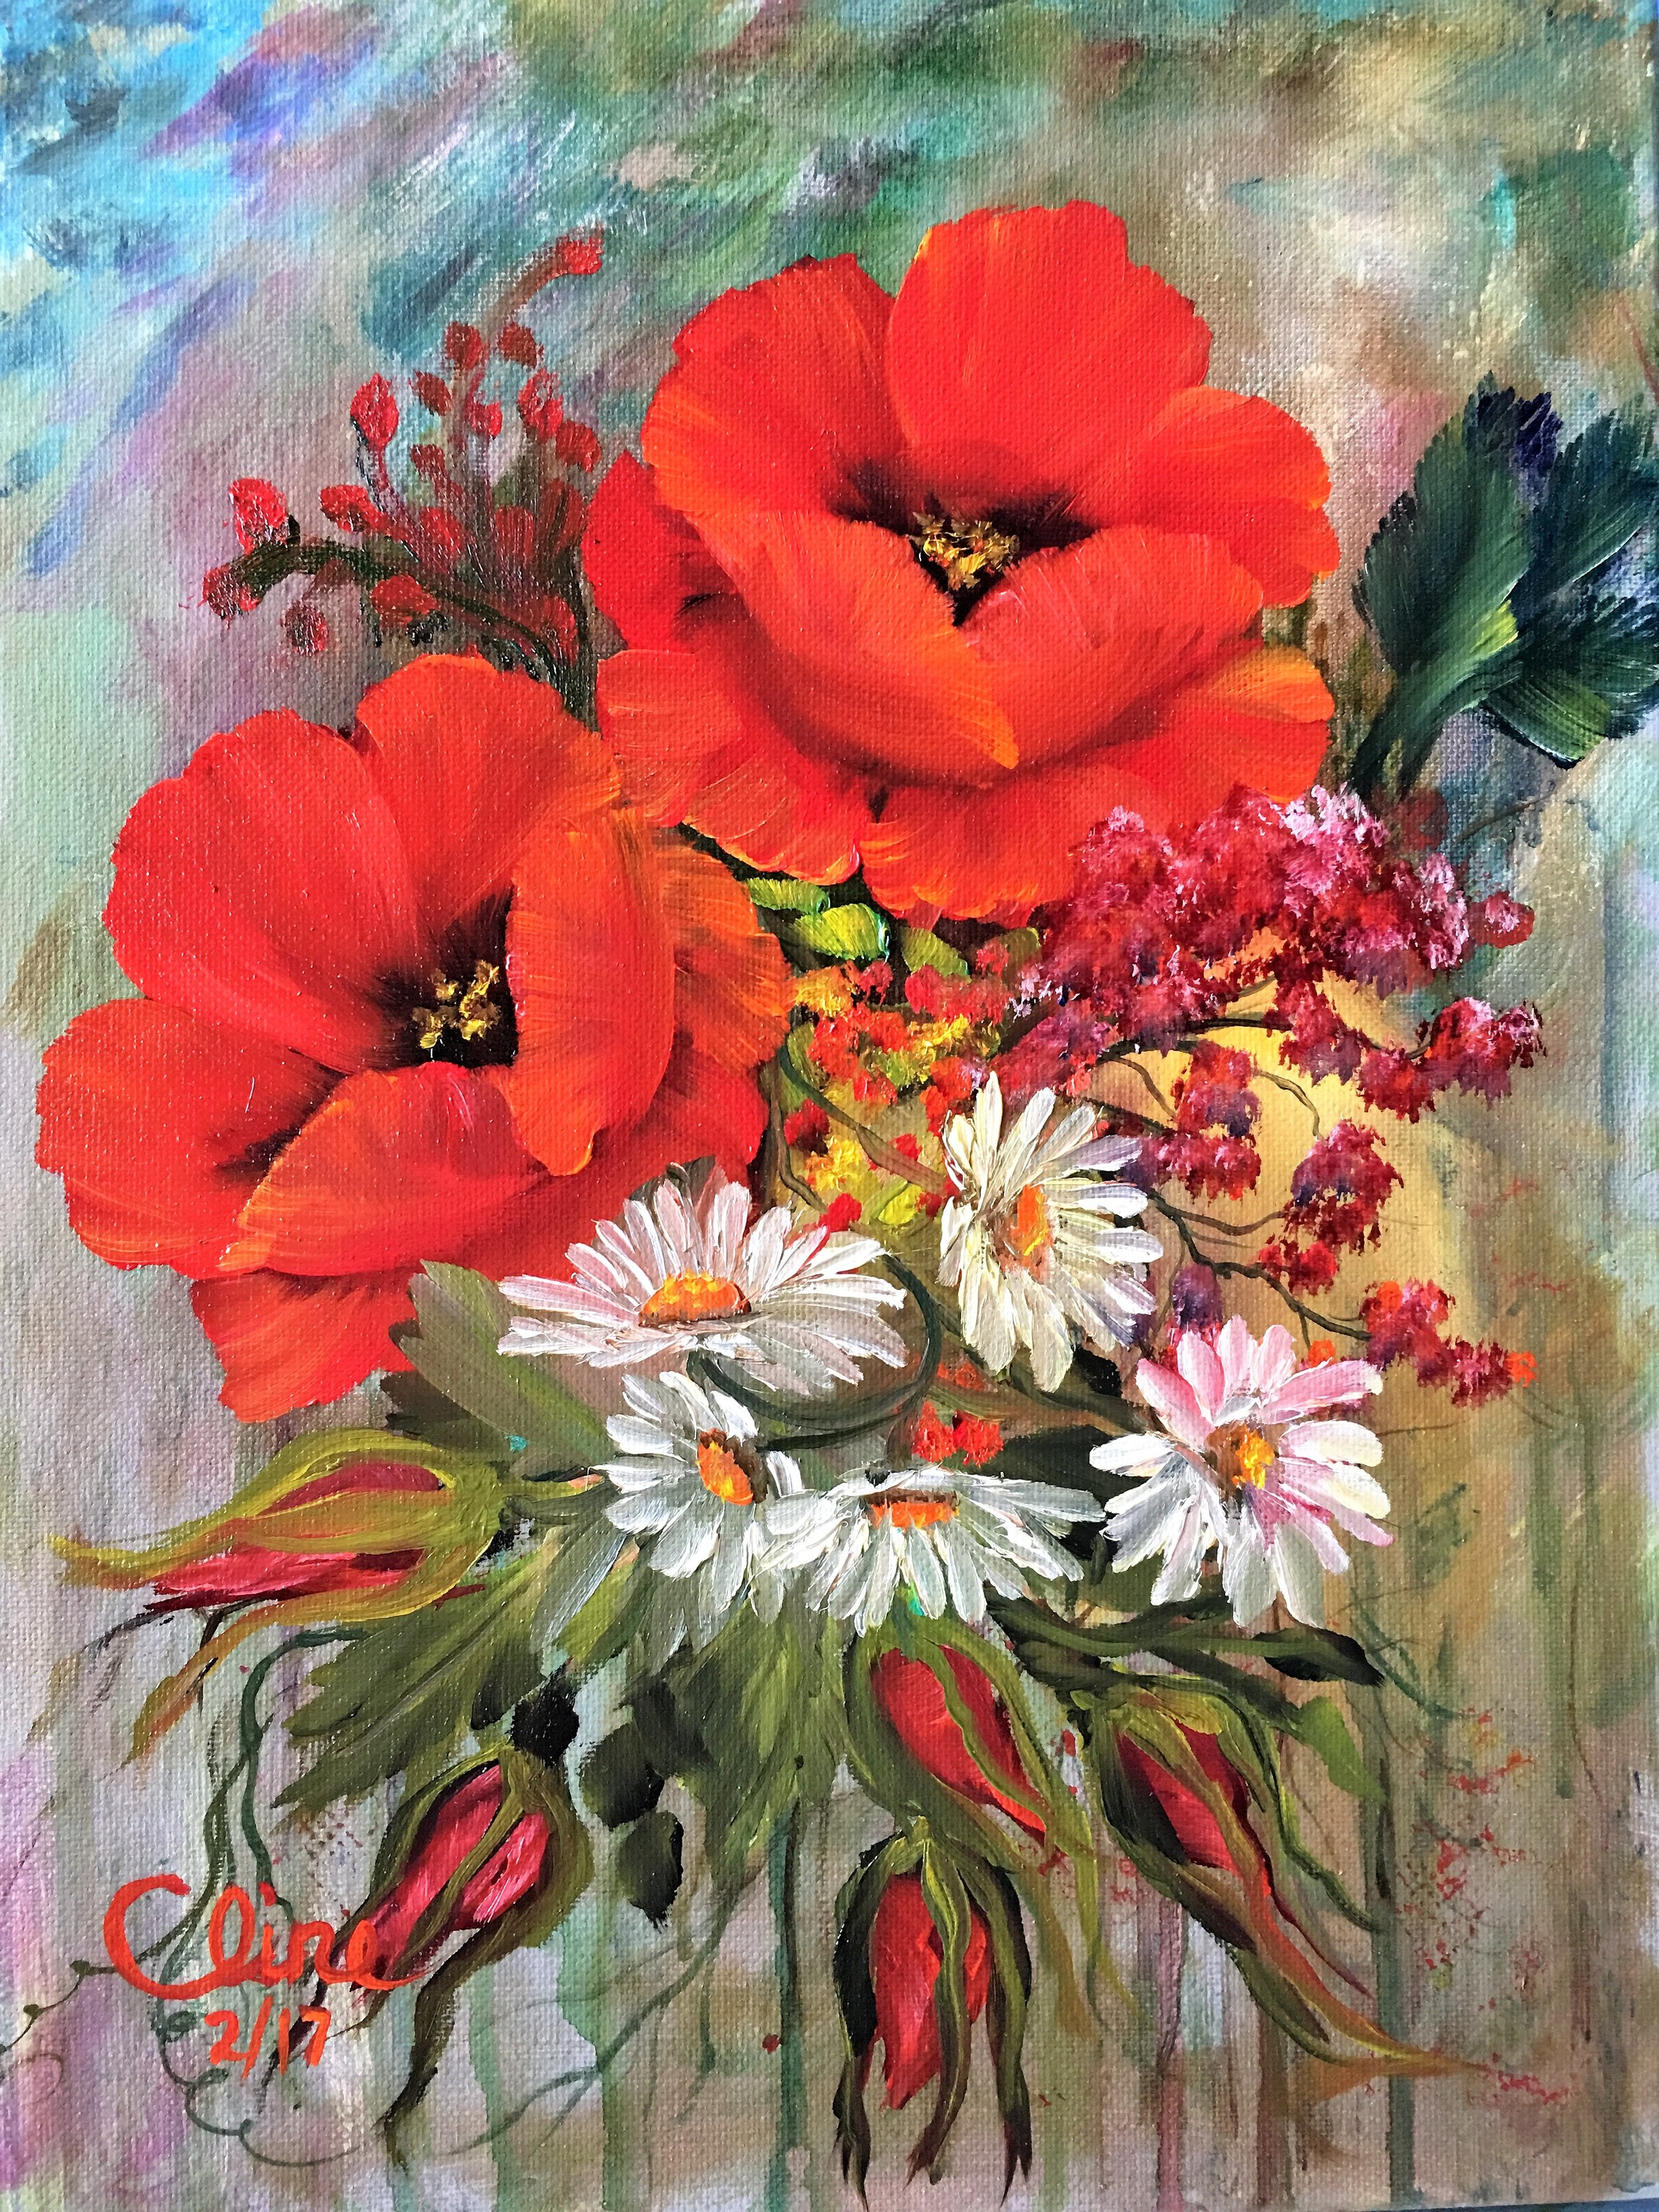 "Poppies and Daisies"